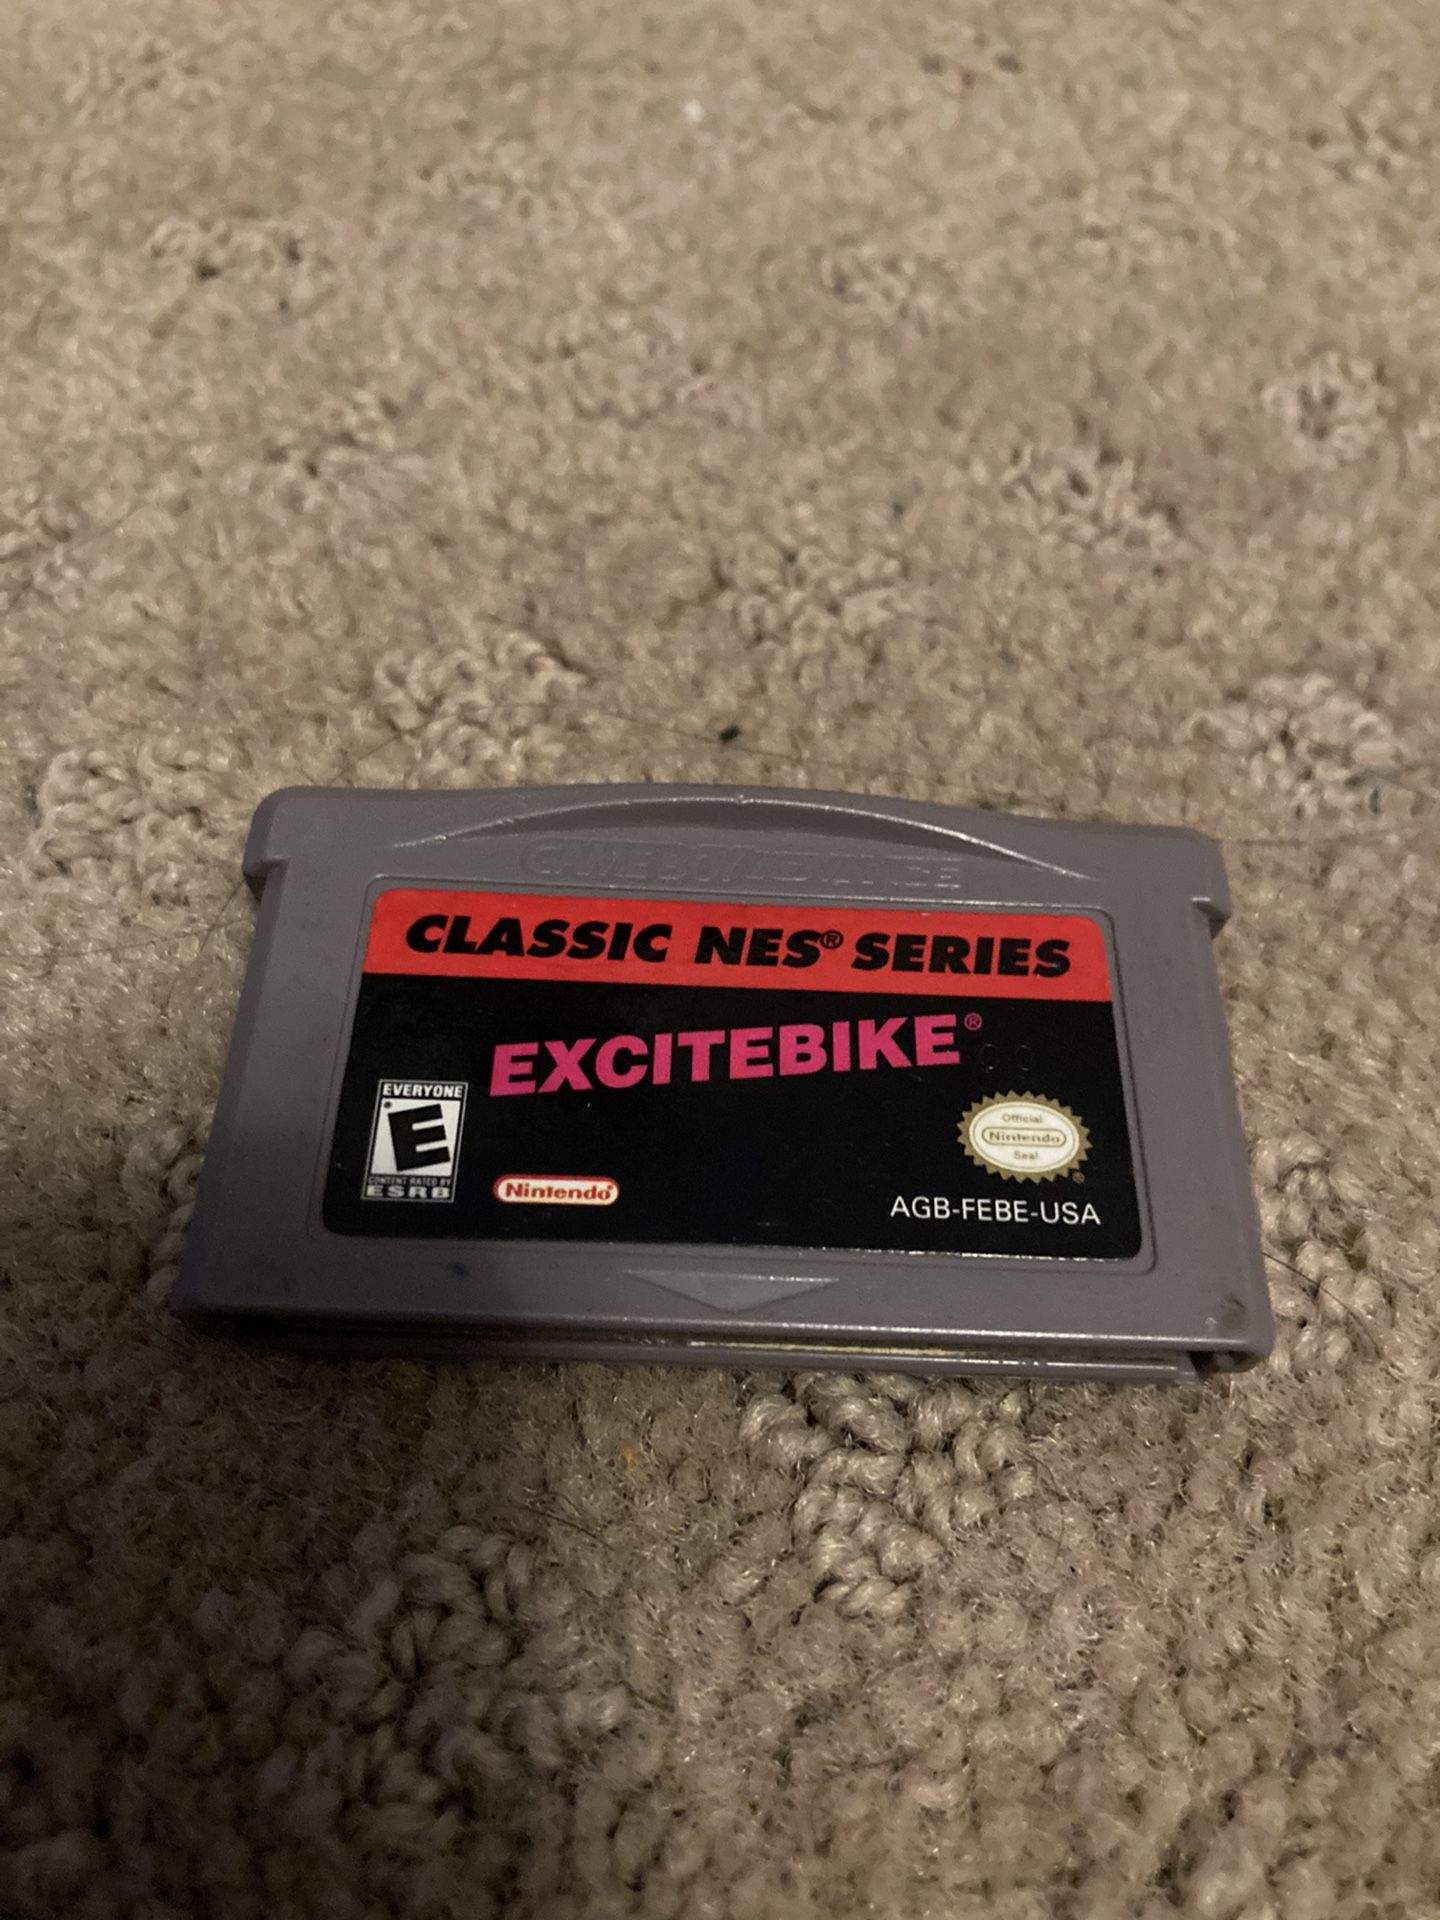 Classic NES Series Excite bike Gameboy Advance GBA